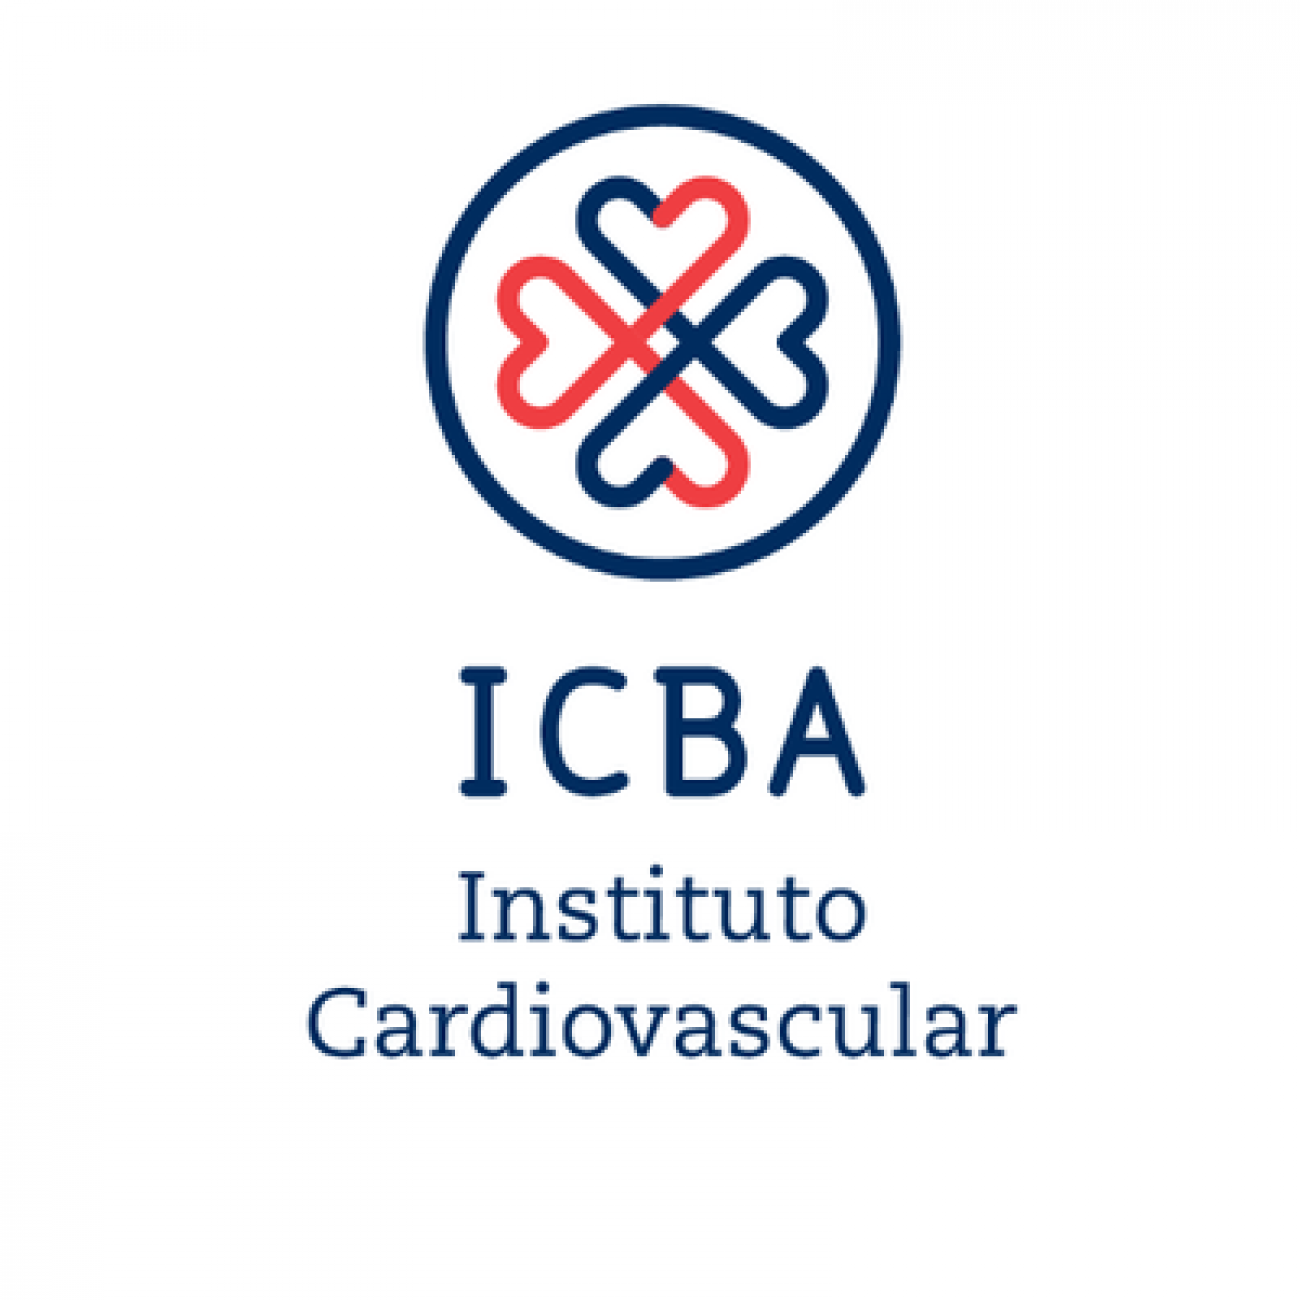 Cardiovascular Emergency Care Section, Instituto Cardiovascular de Buenos Aires, Buenos Aires, Argentina